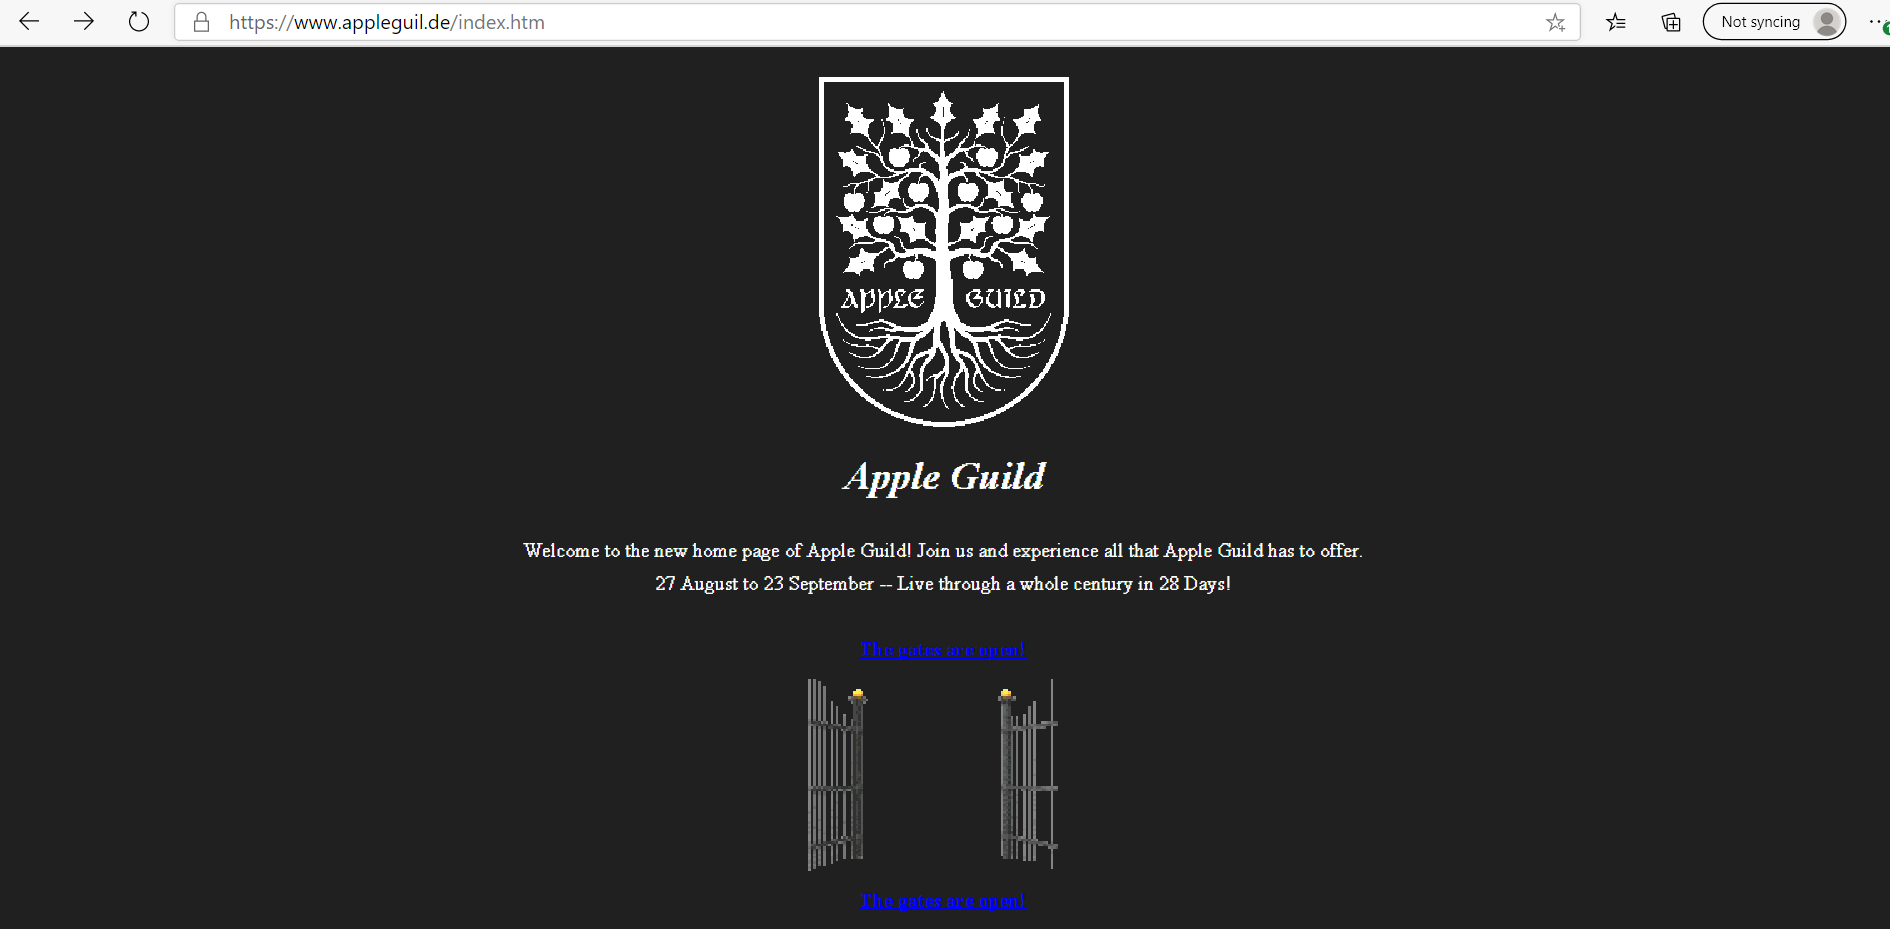 This image shows the Welcome Page for the Discord server appleguil.de ('Apple Guild').